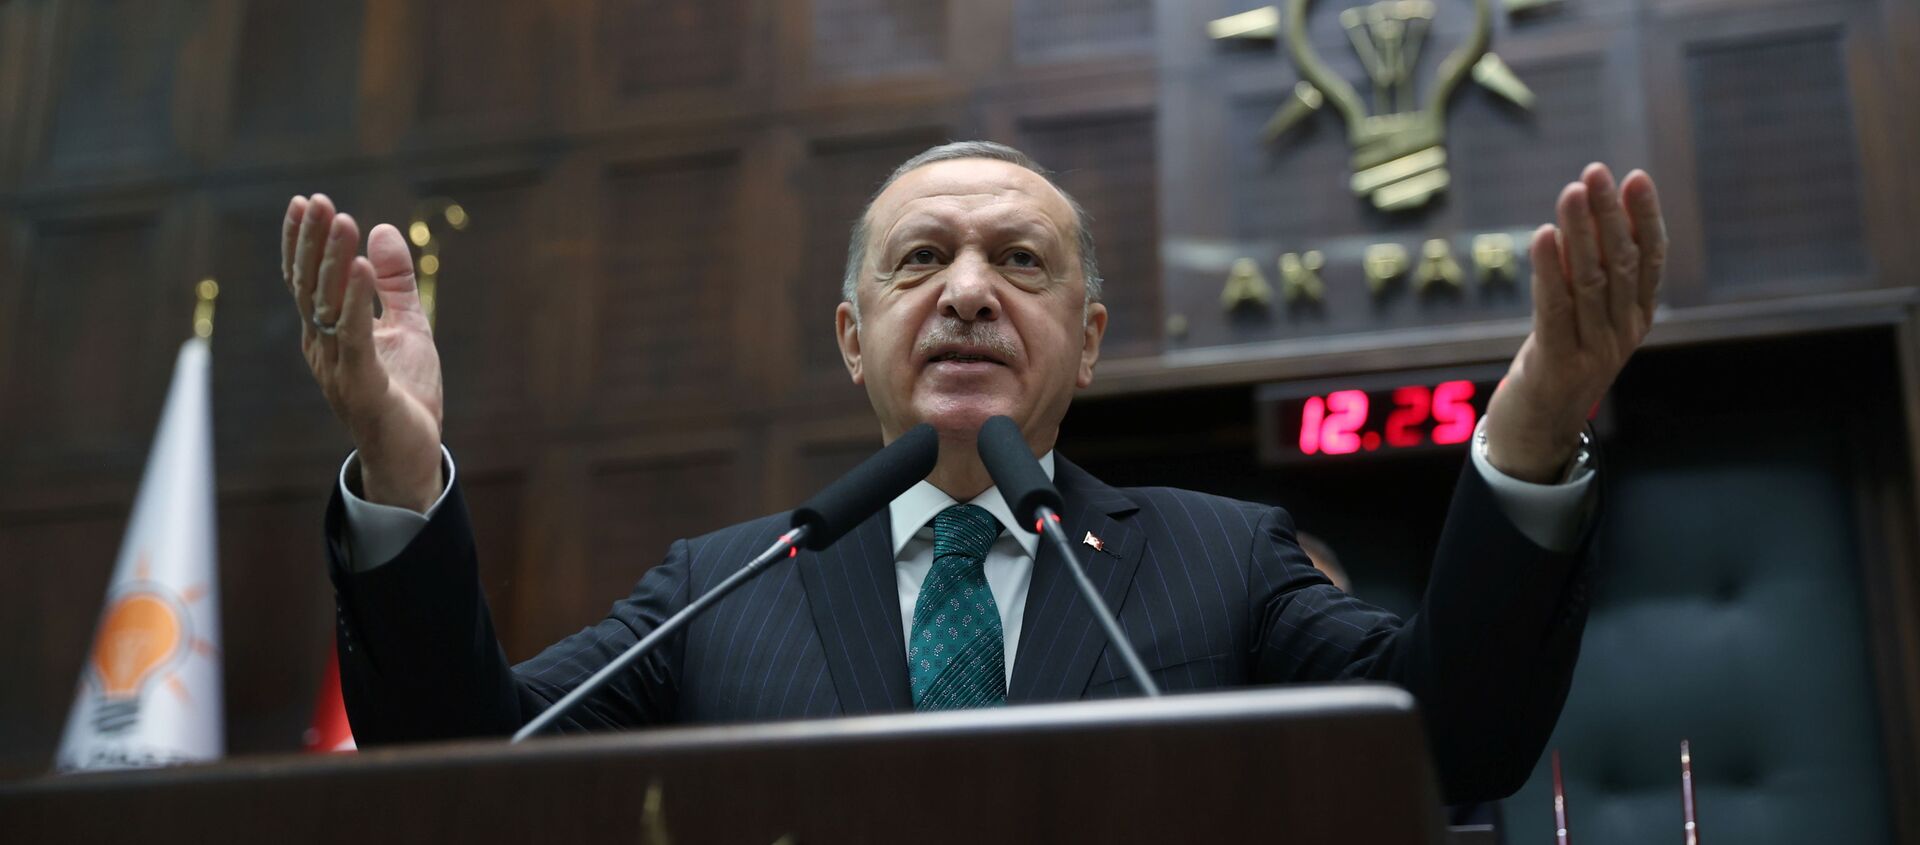 Turkish President Tayyip Erdogan addresses members of parliament from his ruling AK Party (AKP) during a meeting at the Turkish parliament in Ankara, Turkey, February 10, 2021. - Sputnik International, 1920, 16.02.2021